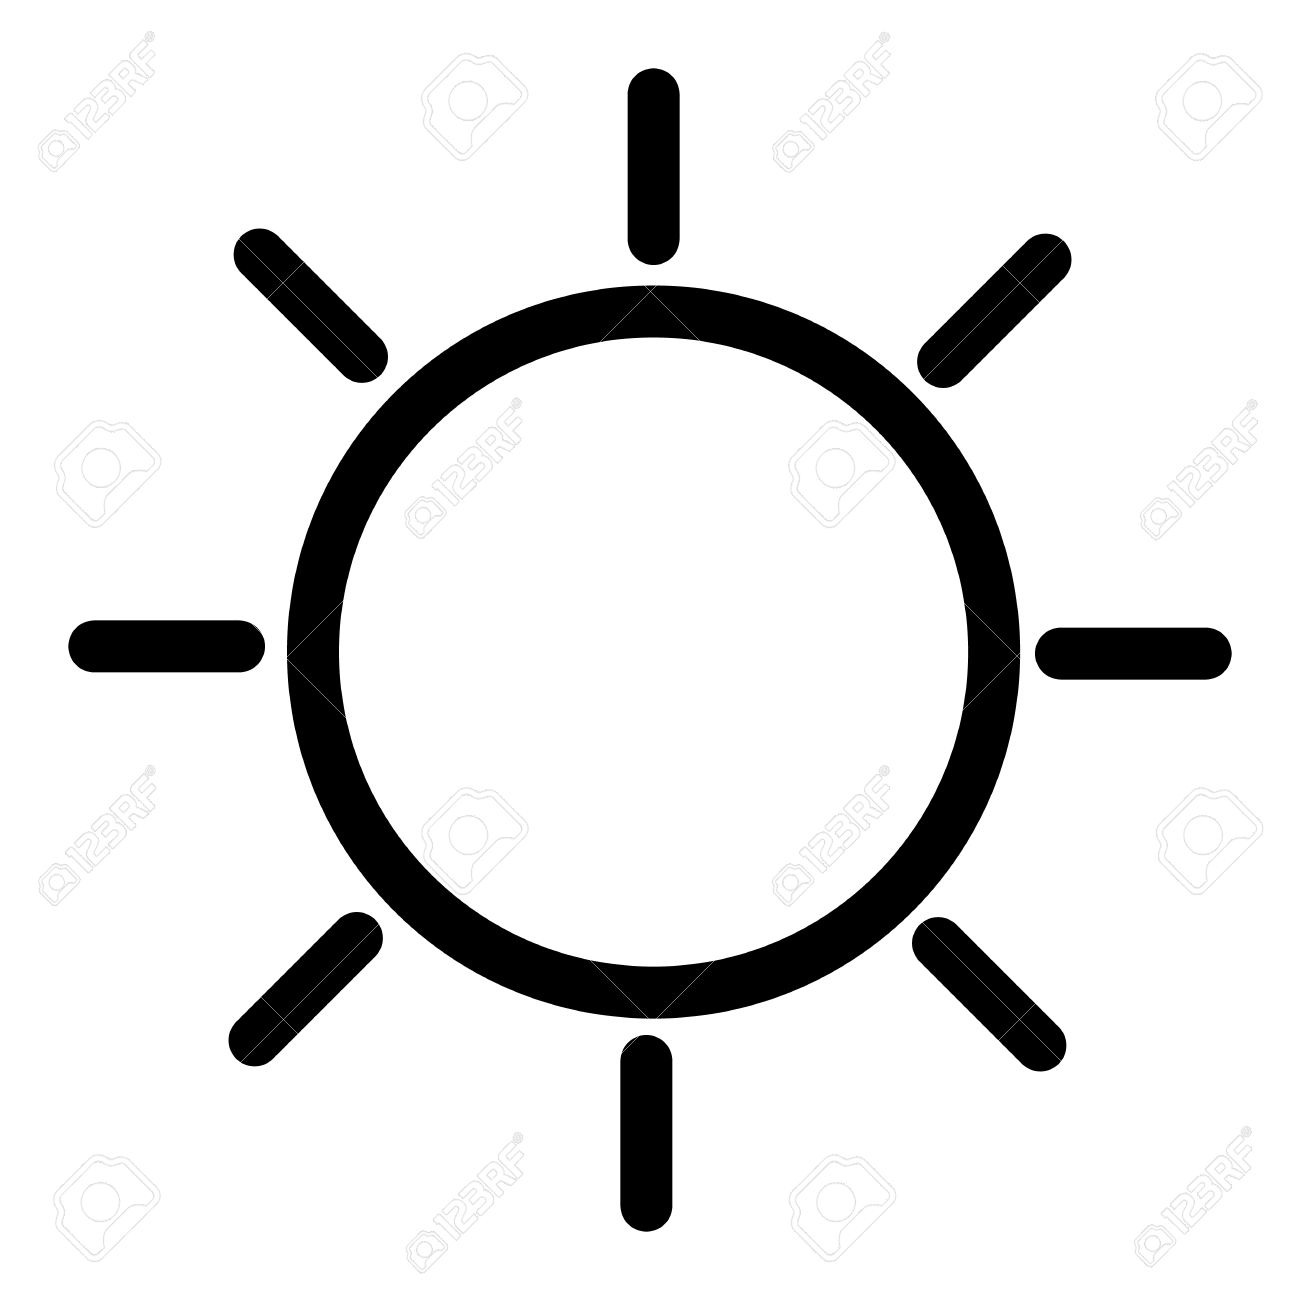 Weather web icon with sun